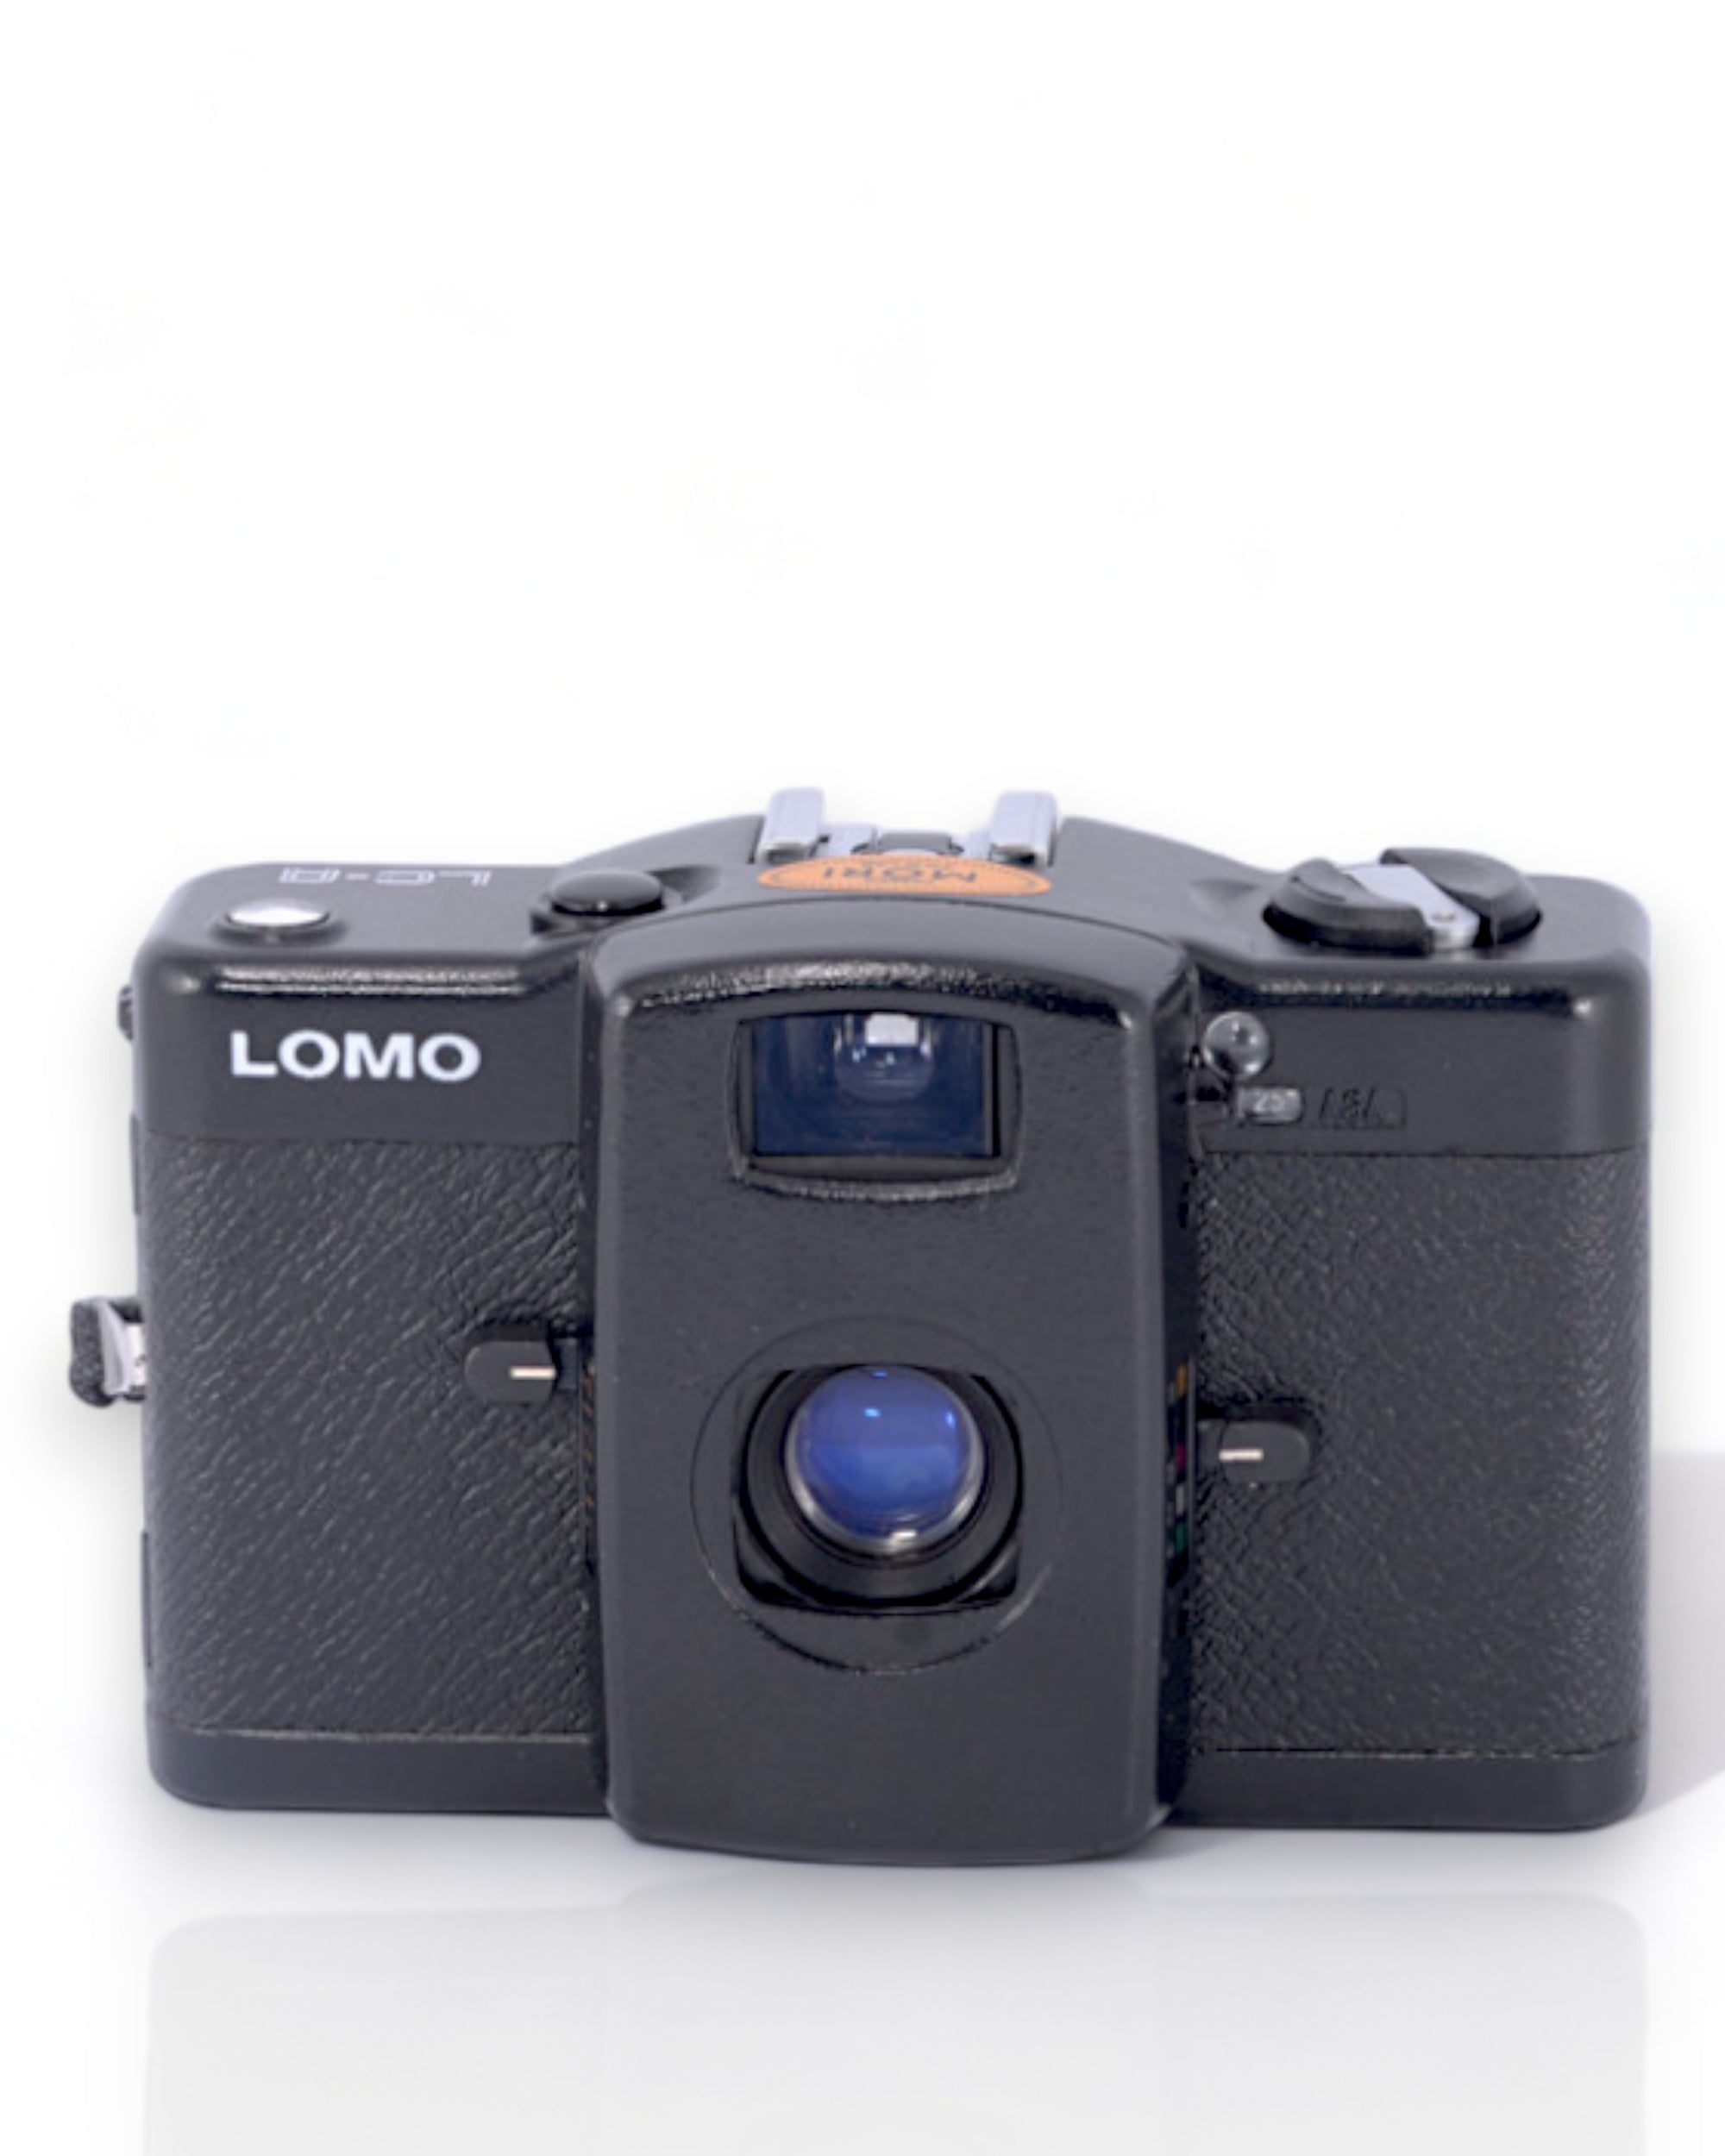 BOXED Lomo LC-A 35mm Point and Shoot film camera with 32mm f/2.8 lens